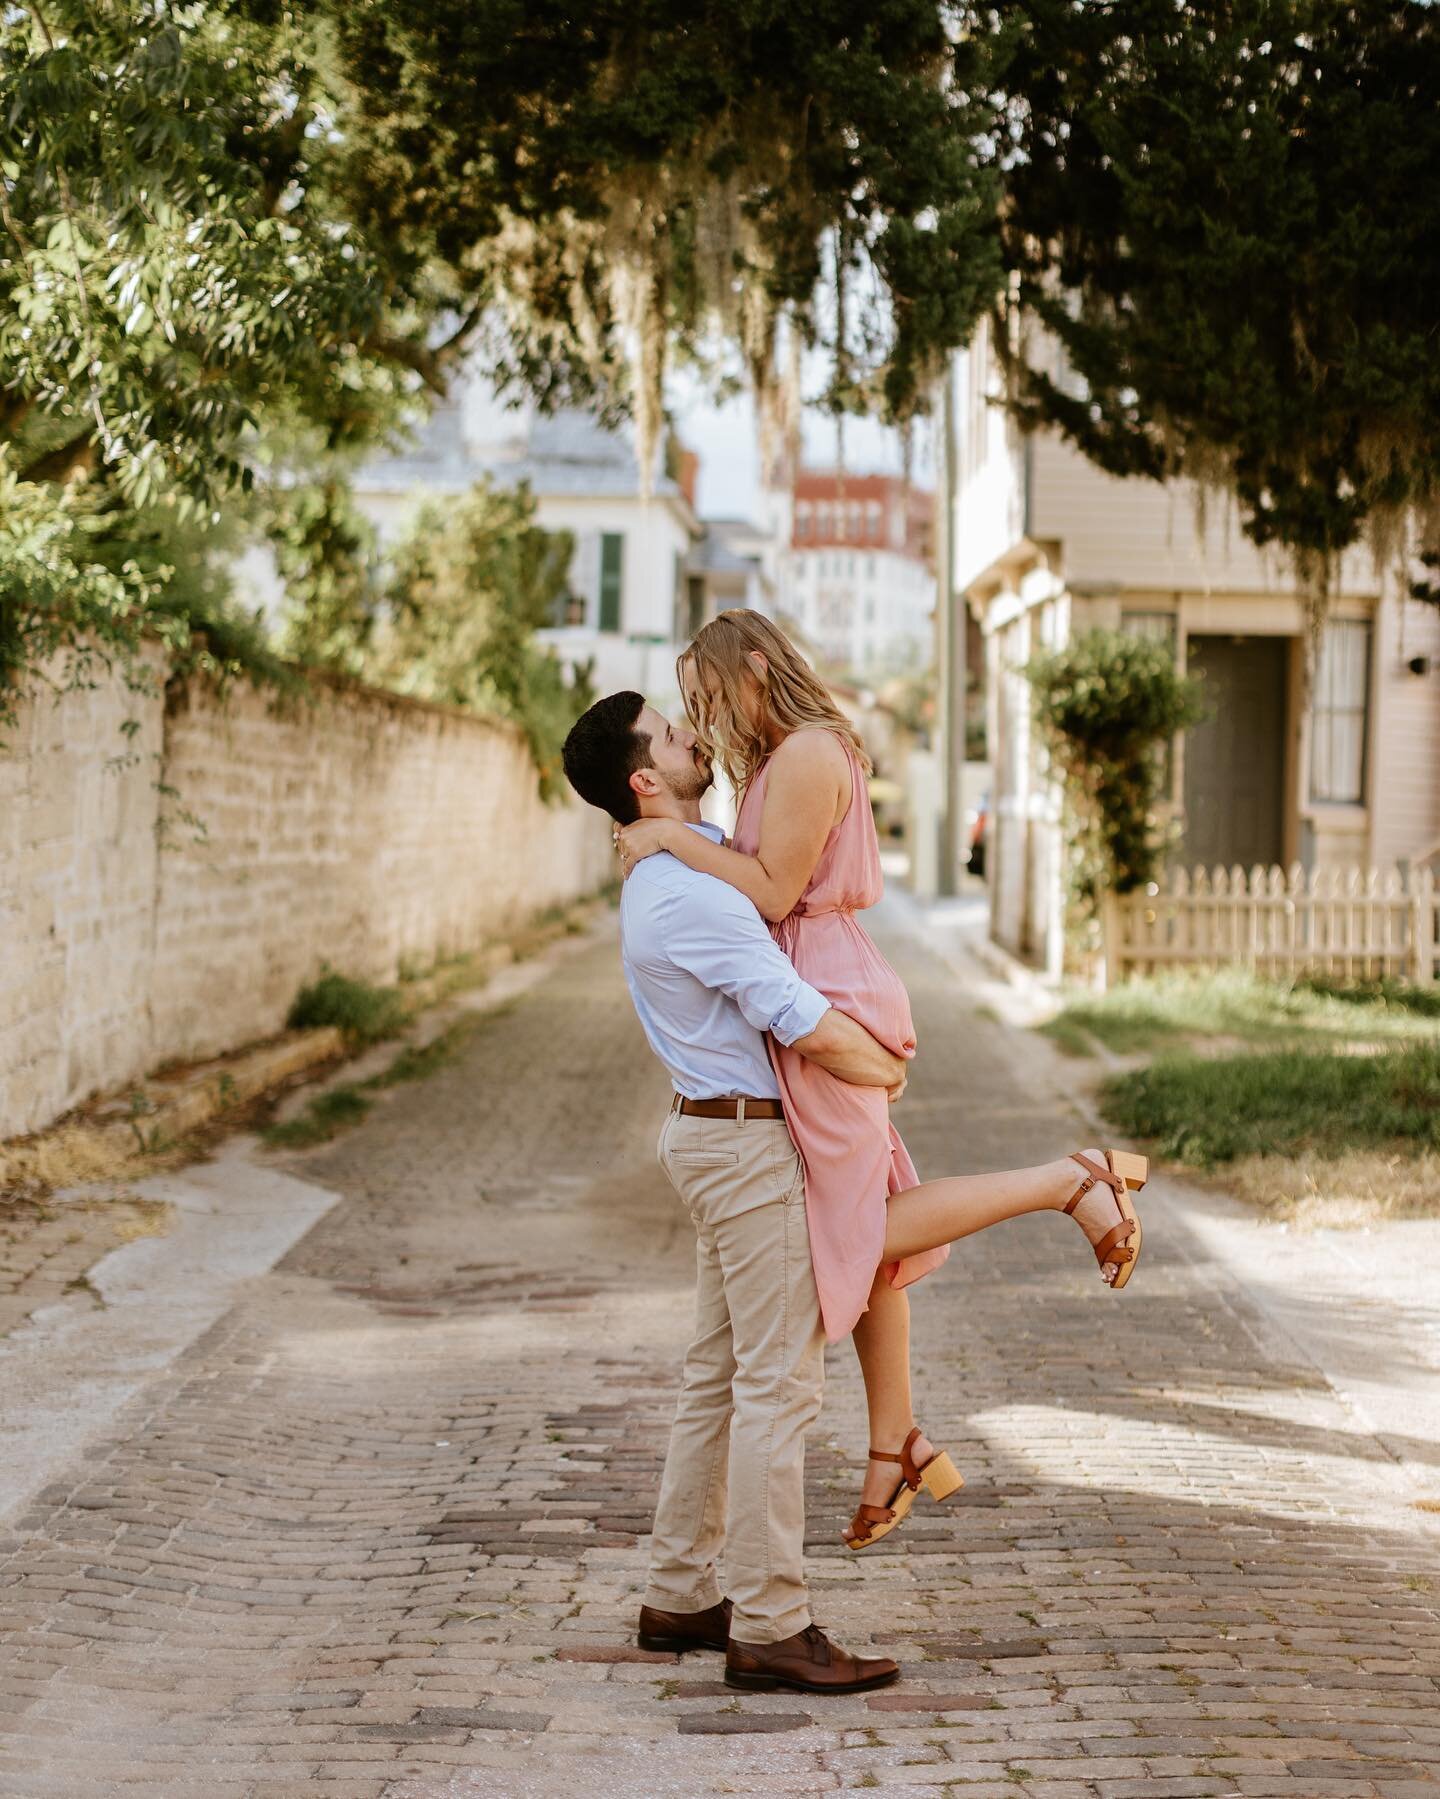 Summer loving, had me a blast ✨

Absolutely loved roaming the streets of St Augustine on a warm July evening with Gracie &amp; Jacob. Every time I shoot downtown, I find a new favorite alleyway with blooms and Spanish moss 🌿

#staugustine #staugusti